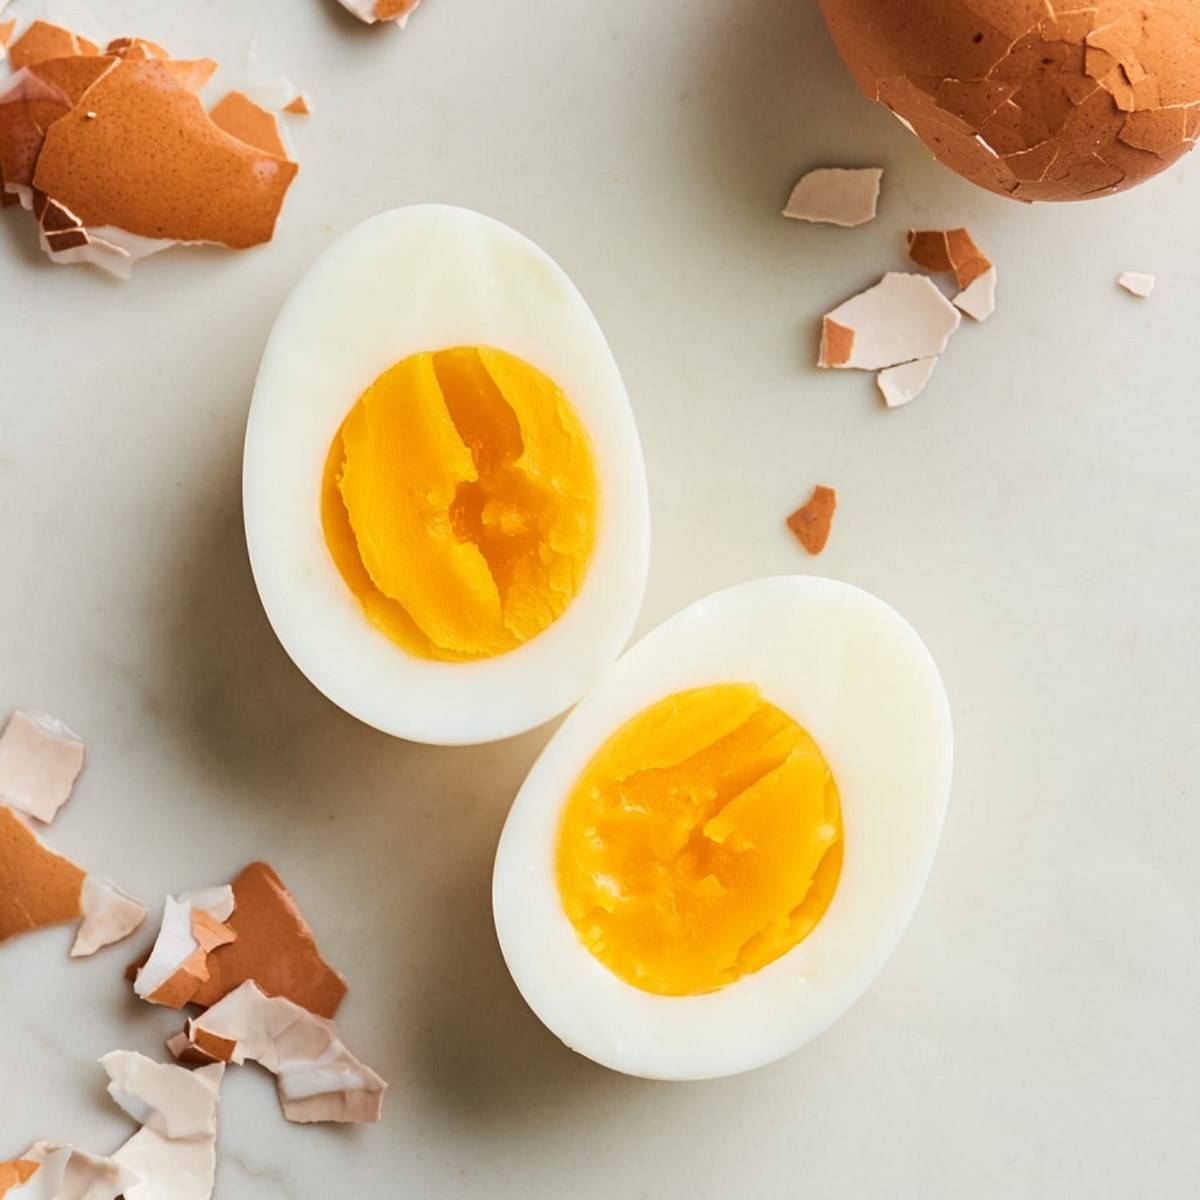 A rich source of protein : Egg